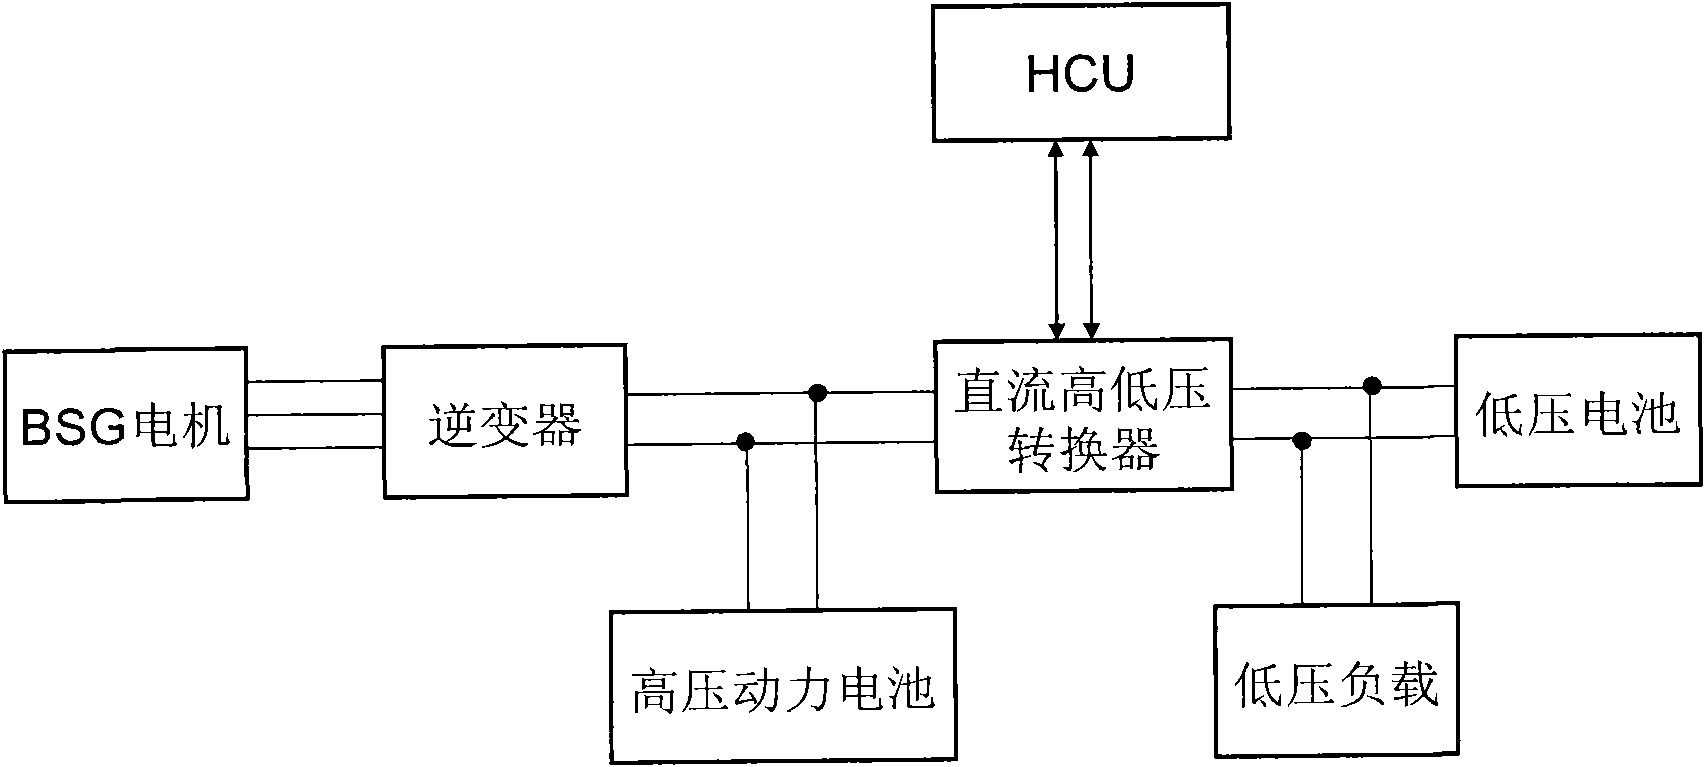 Enabling control method and output voltage control method of direct current-direct current converter (DC-DC converter)